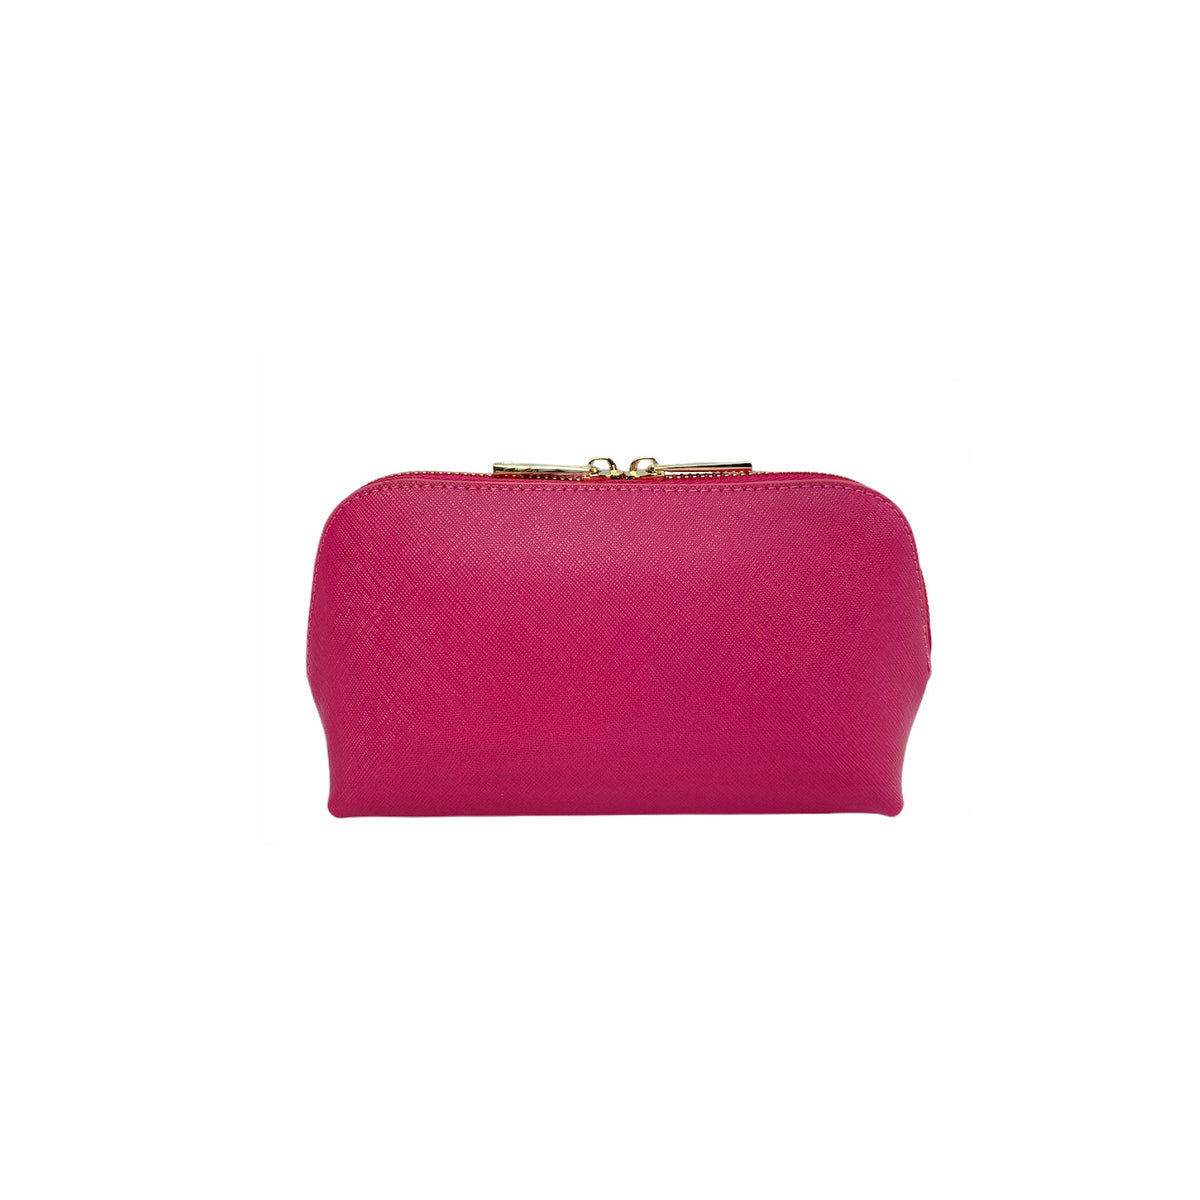 Personalised Cosmetic Bag - Pink Saffiano Leather